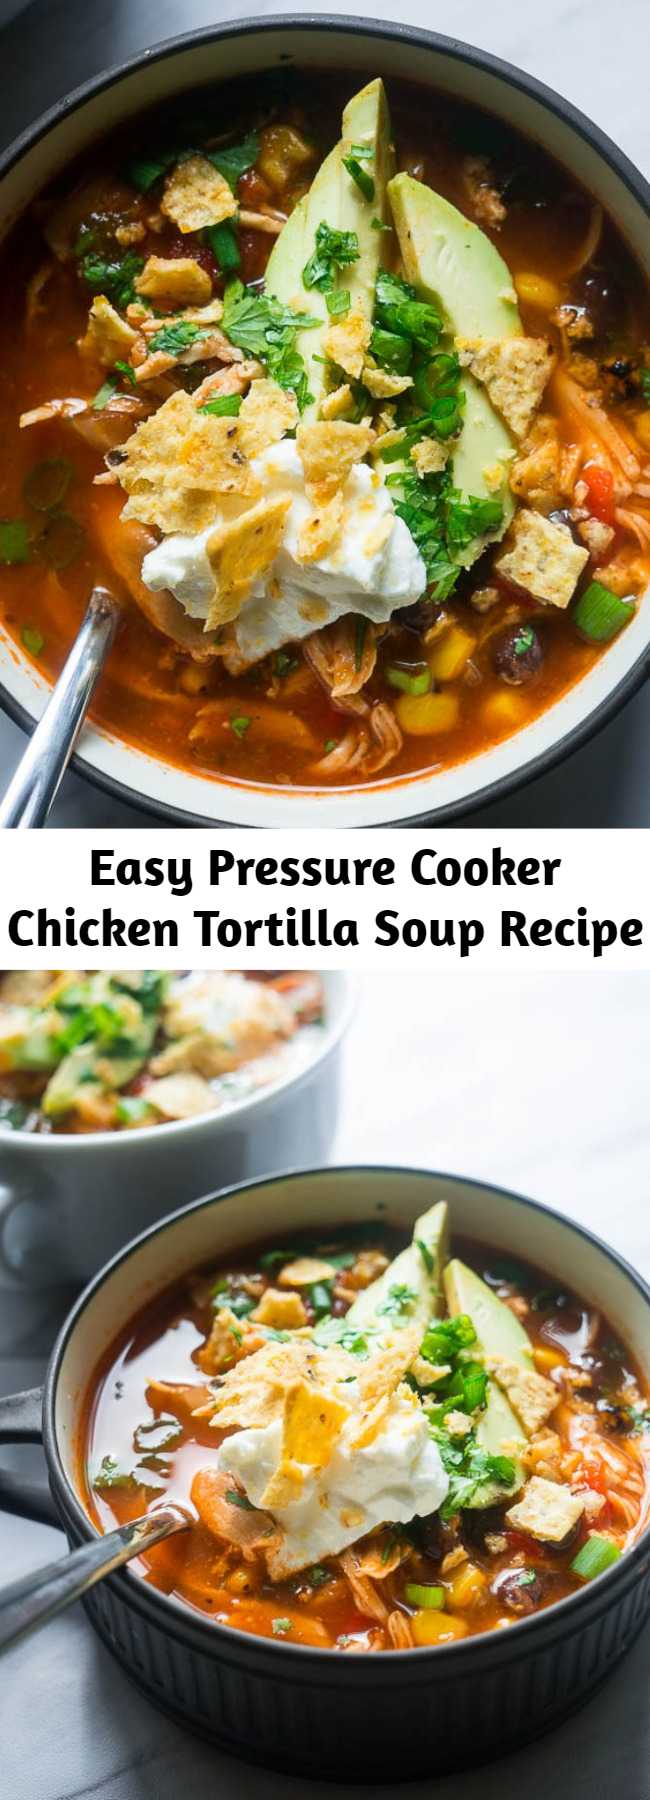 Easy Pressure Cooker Chicken Tortilla Soup Recipe - All in one pot and bursting with flavor, this AhhMazing Pressure Cooker Chicken Tortilla Soup will NOT let you down. If you’re overwhelmed by the idea of learning how to use your new pressure cooker, don’t be scared!! This is the perfect entry recipe for you and I’m going to venture to say, FOOL-PROOF! You can do it! I have full faith.